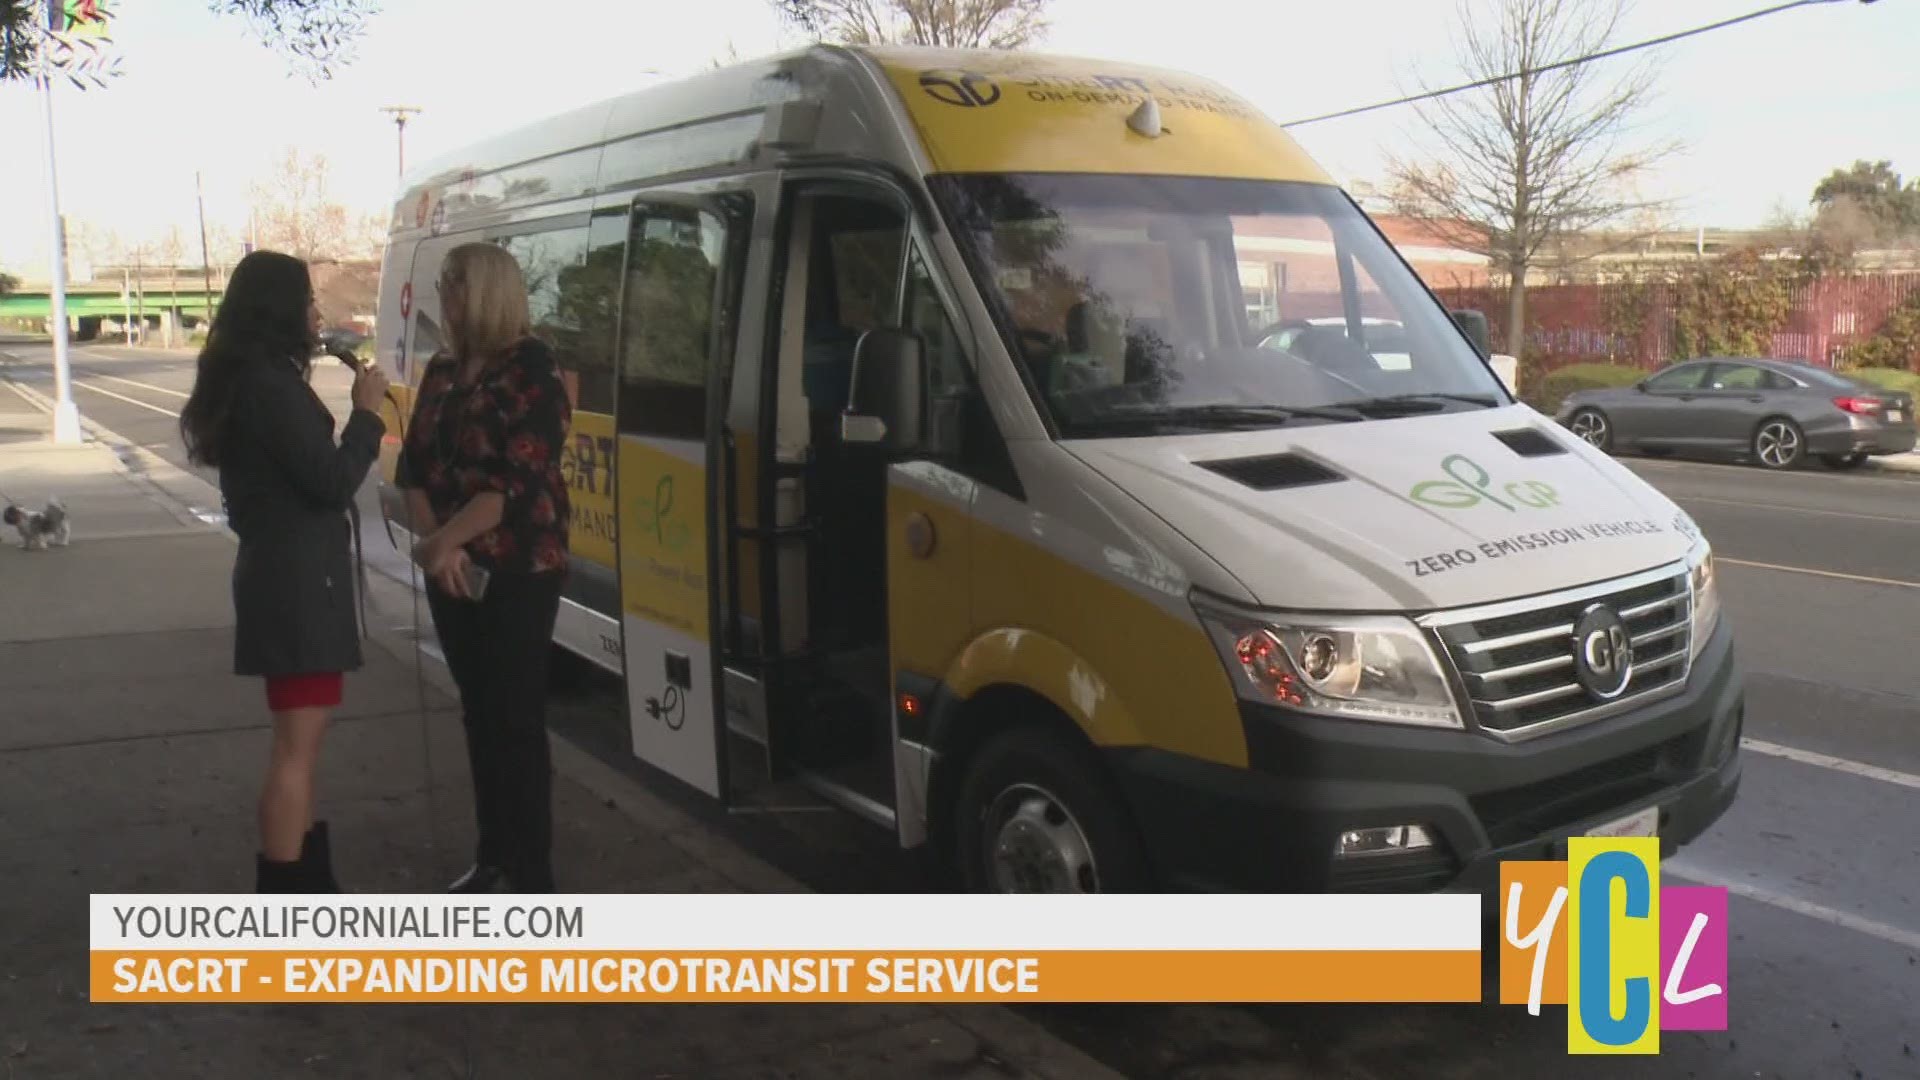 SacRT has expanded its popular on-demand microtransit service to six new communities and has a new app for all SmaRT Ride users.